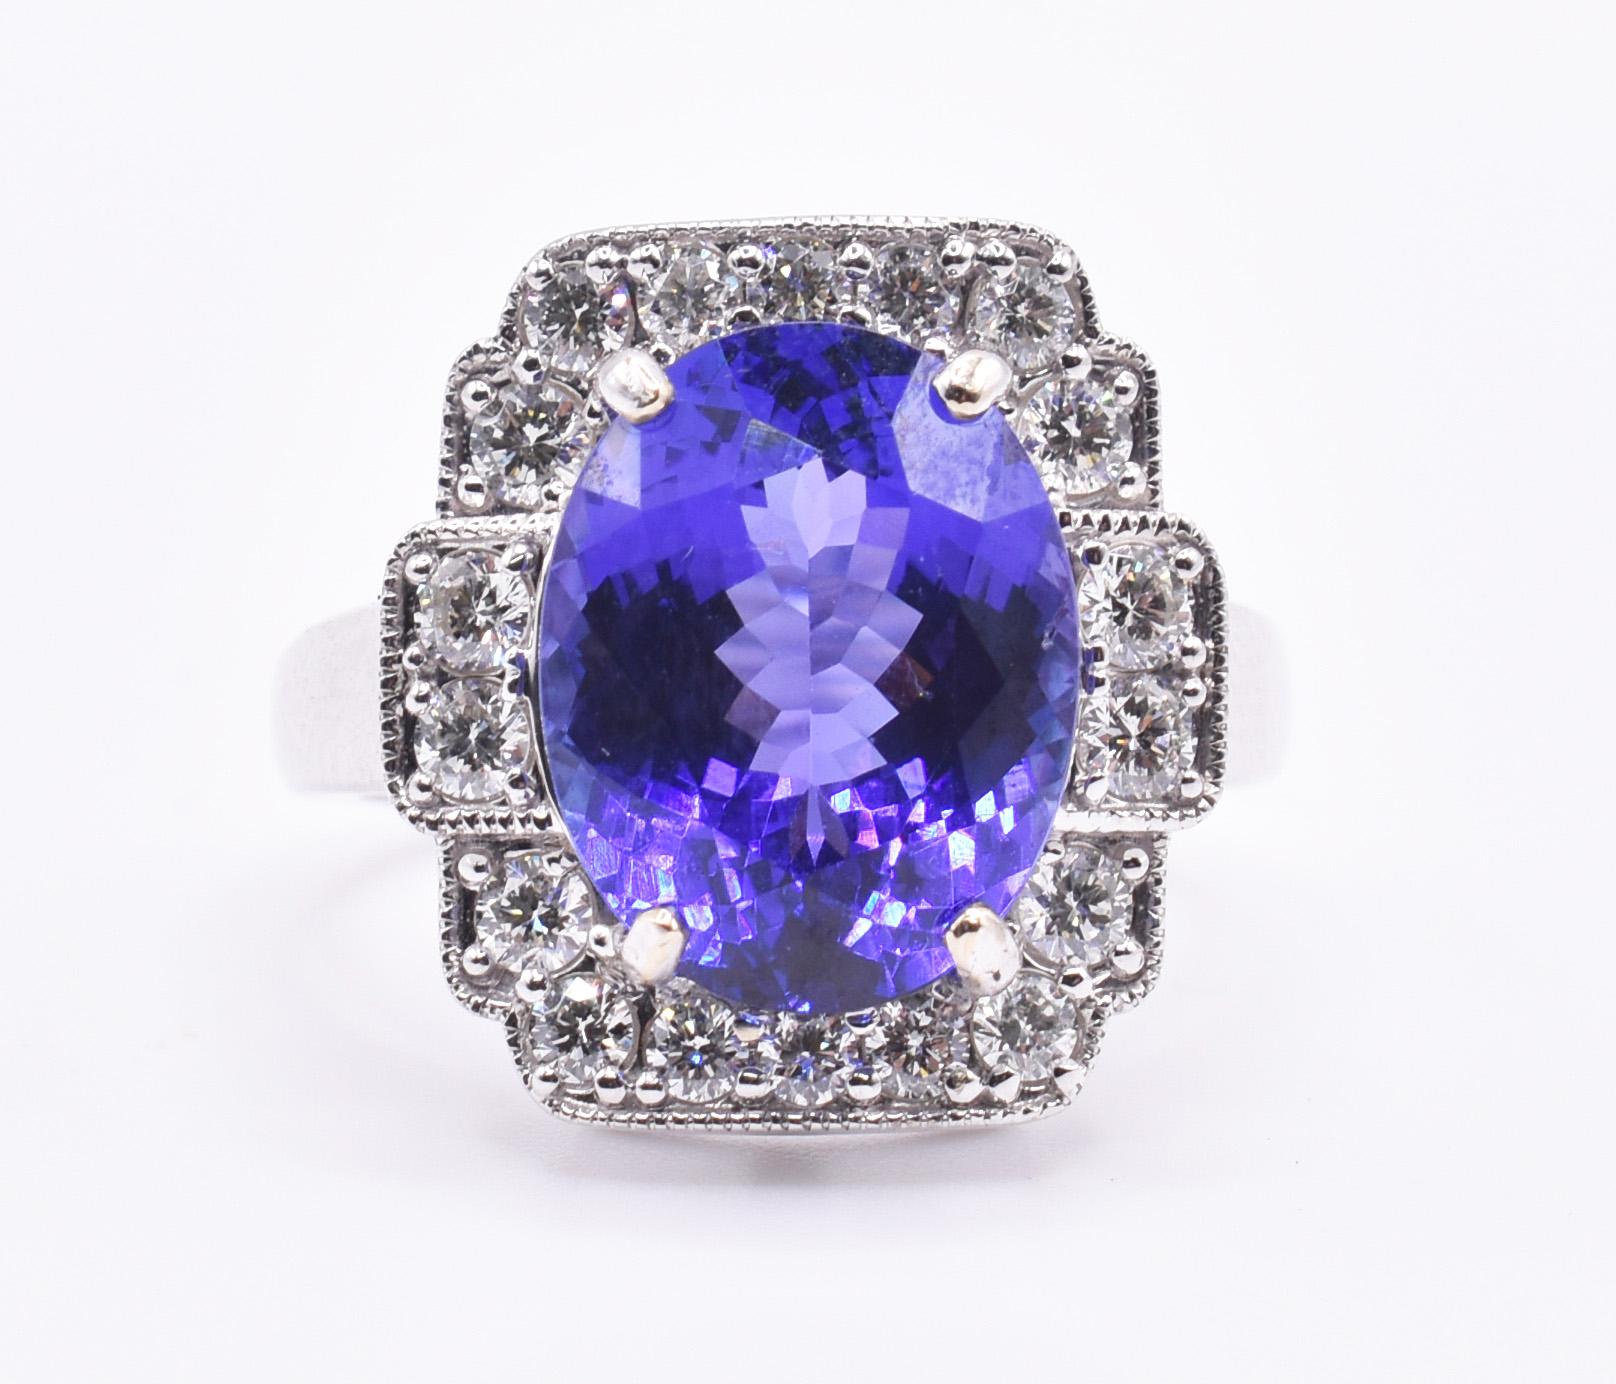 A superb 18k white gold tanzanite ring, featuring a 6.62 carat tanzanite to the centre, in a prong setting, surrounded by 18 round brilliant cut diamonds, also prong set. 

Metal: 18k White Gold
Total Carat Weight (Tanzanite): 6.62ct
Total Carat